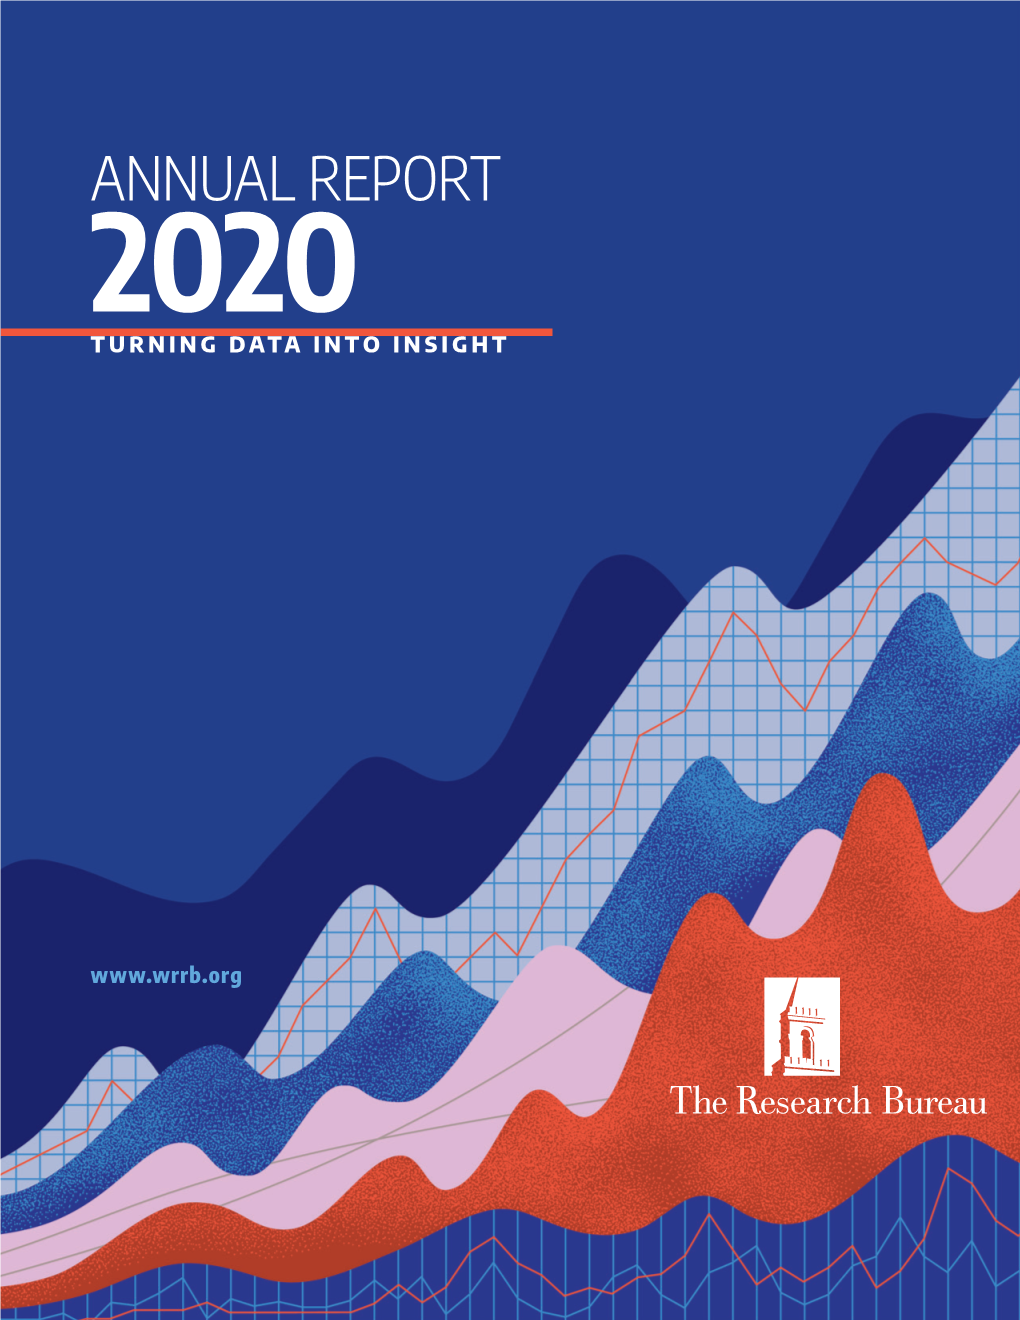 Annual Report 2020 Turning Data Into Insight